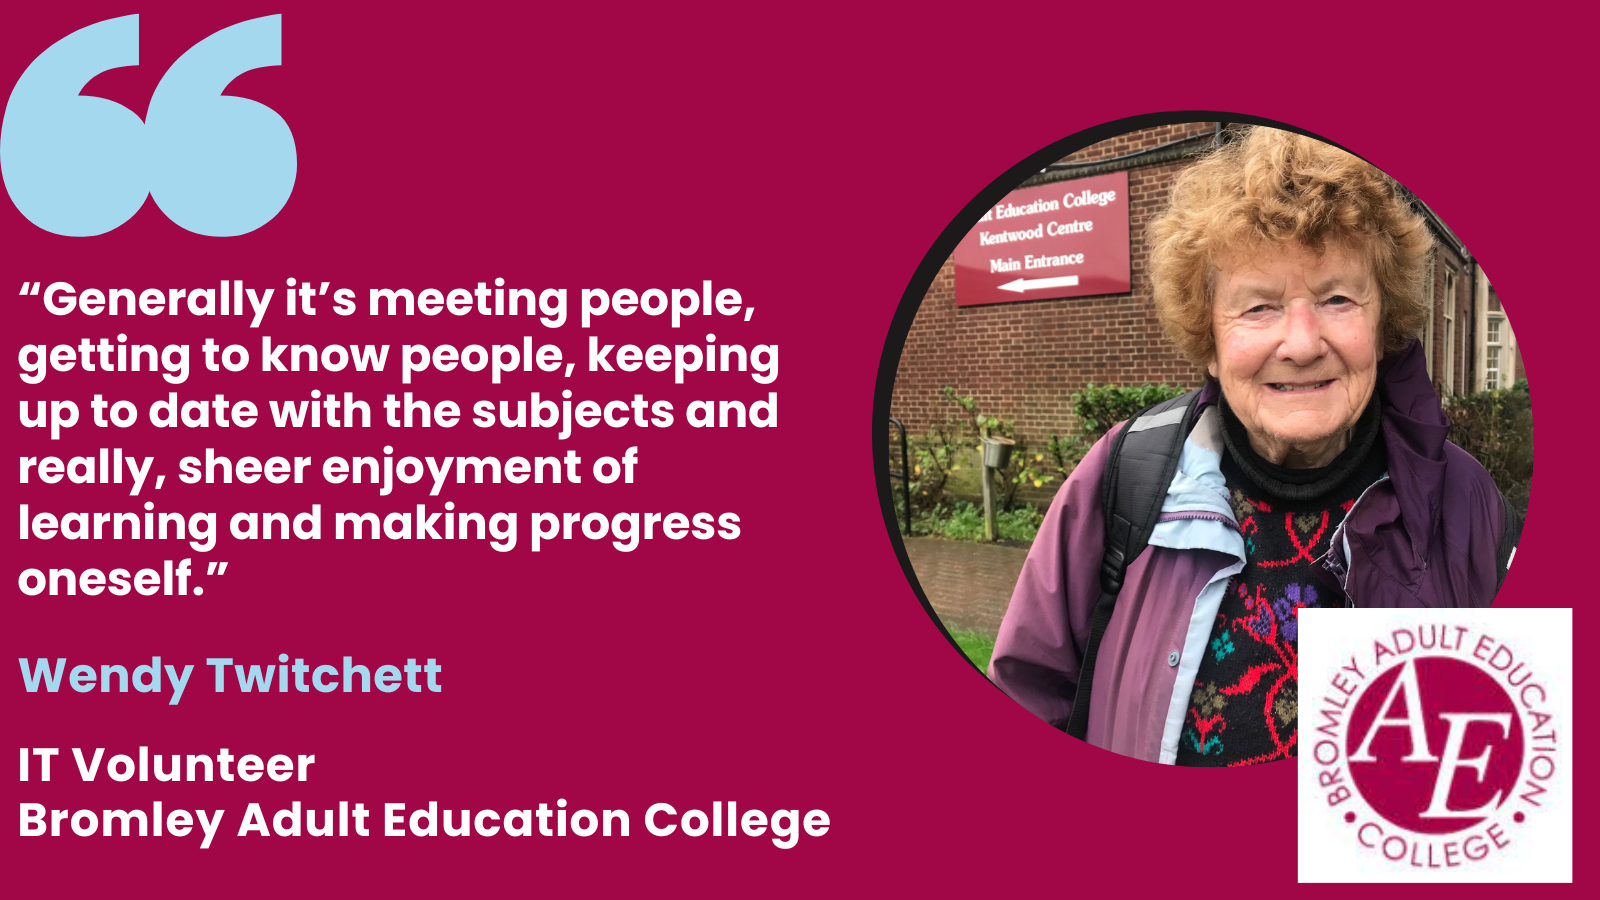 Image with quote from Bromley Adult Education College IT Volunteer, Wendy Twitchett. Words of quote "Generally it's meeting people, getting to know people, keeping up to date with the subjects and really, sheer enjoyment of learning and making progress oneself"